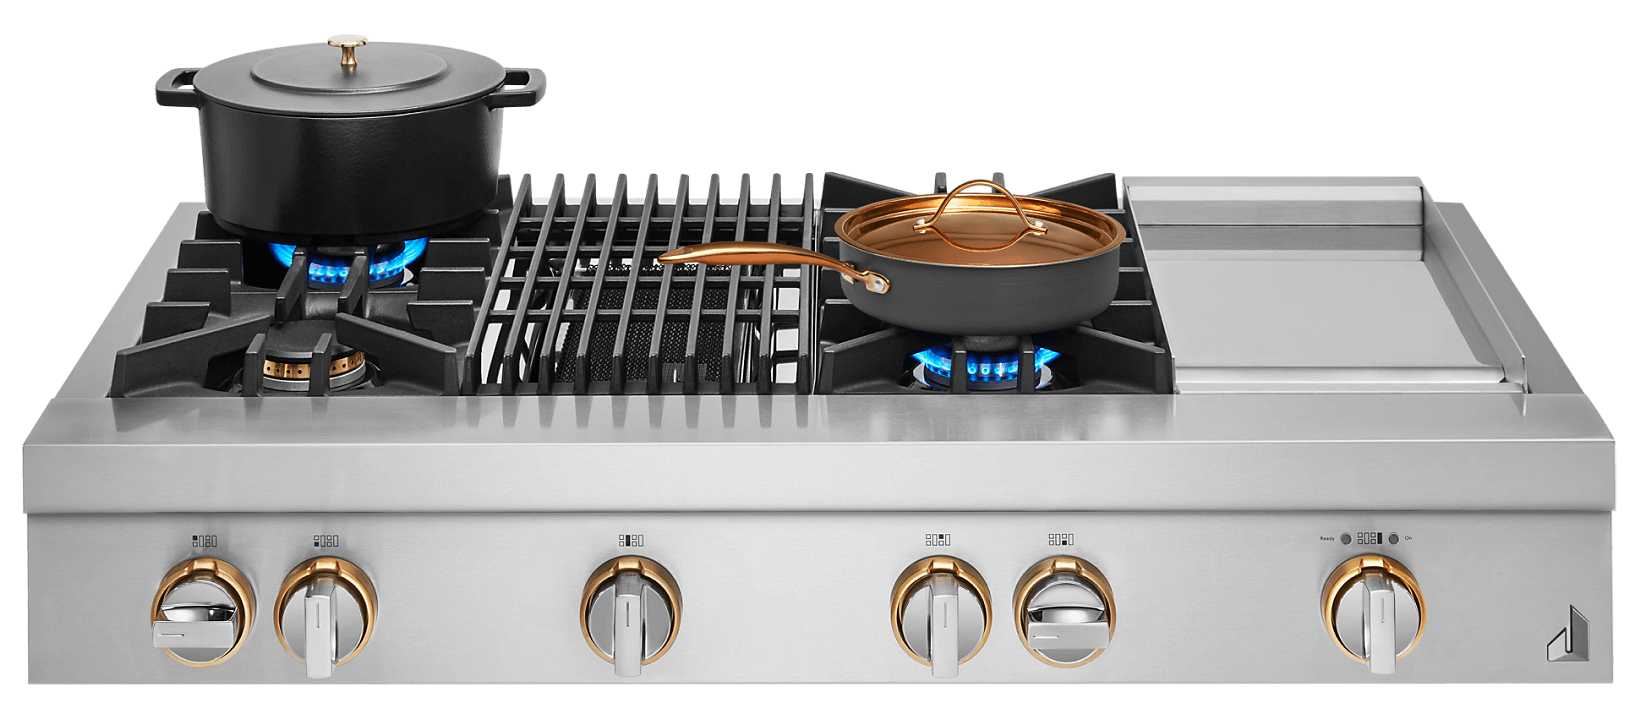 A Cooktop Comparison: Which is the Best Cooktop for Your Kitchen